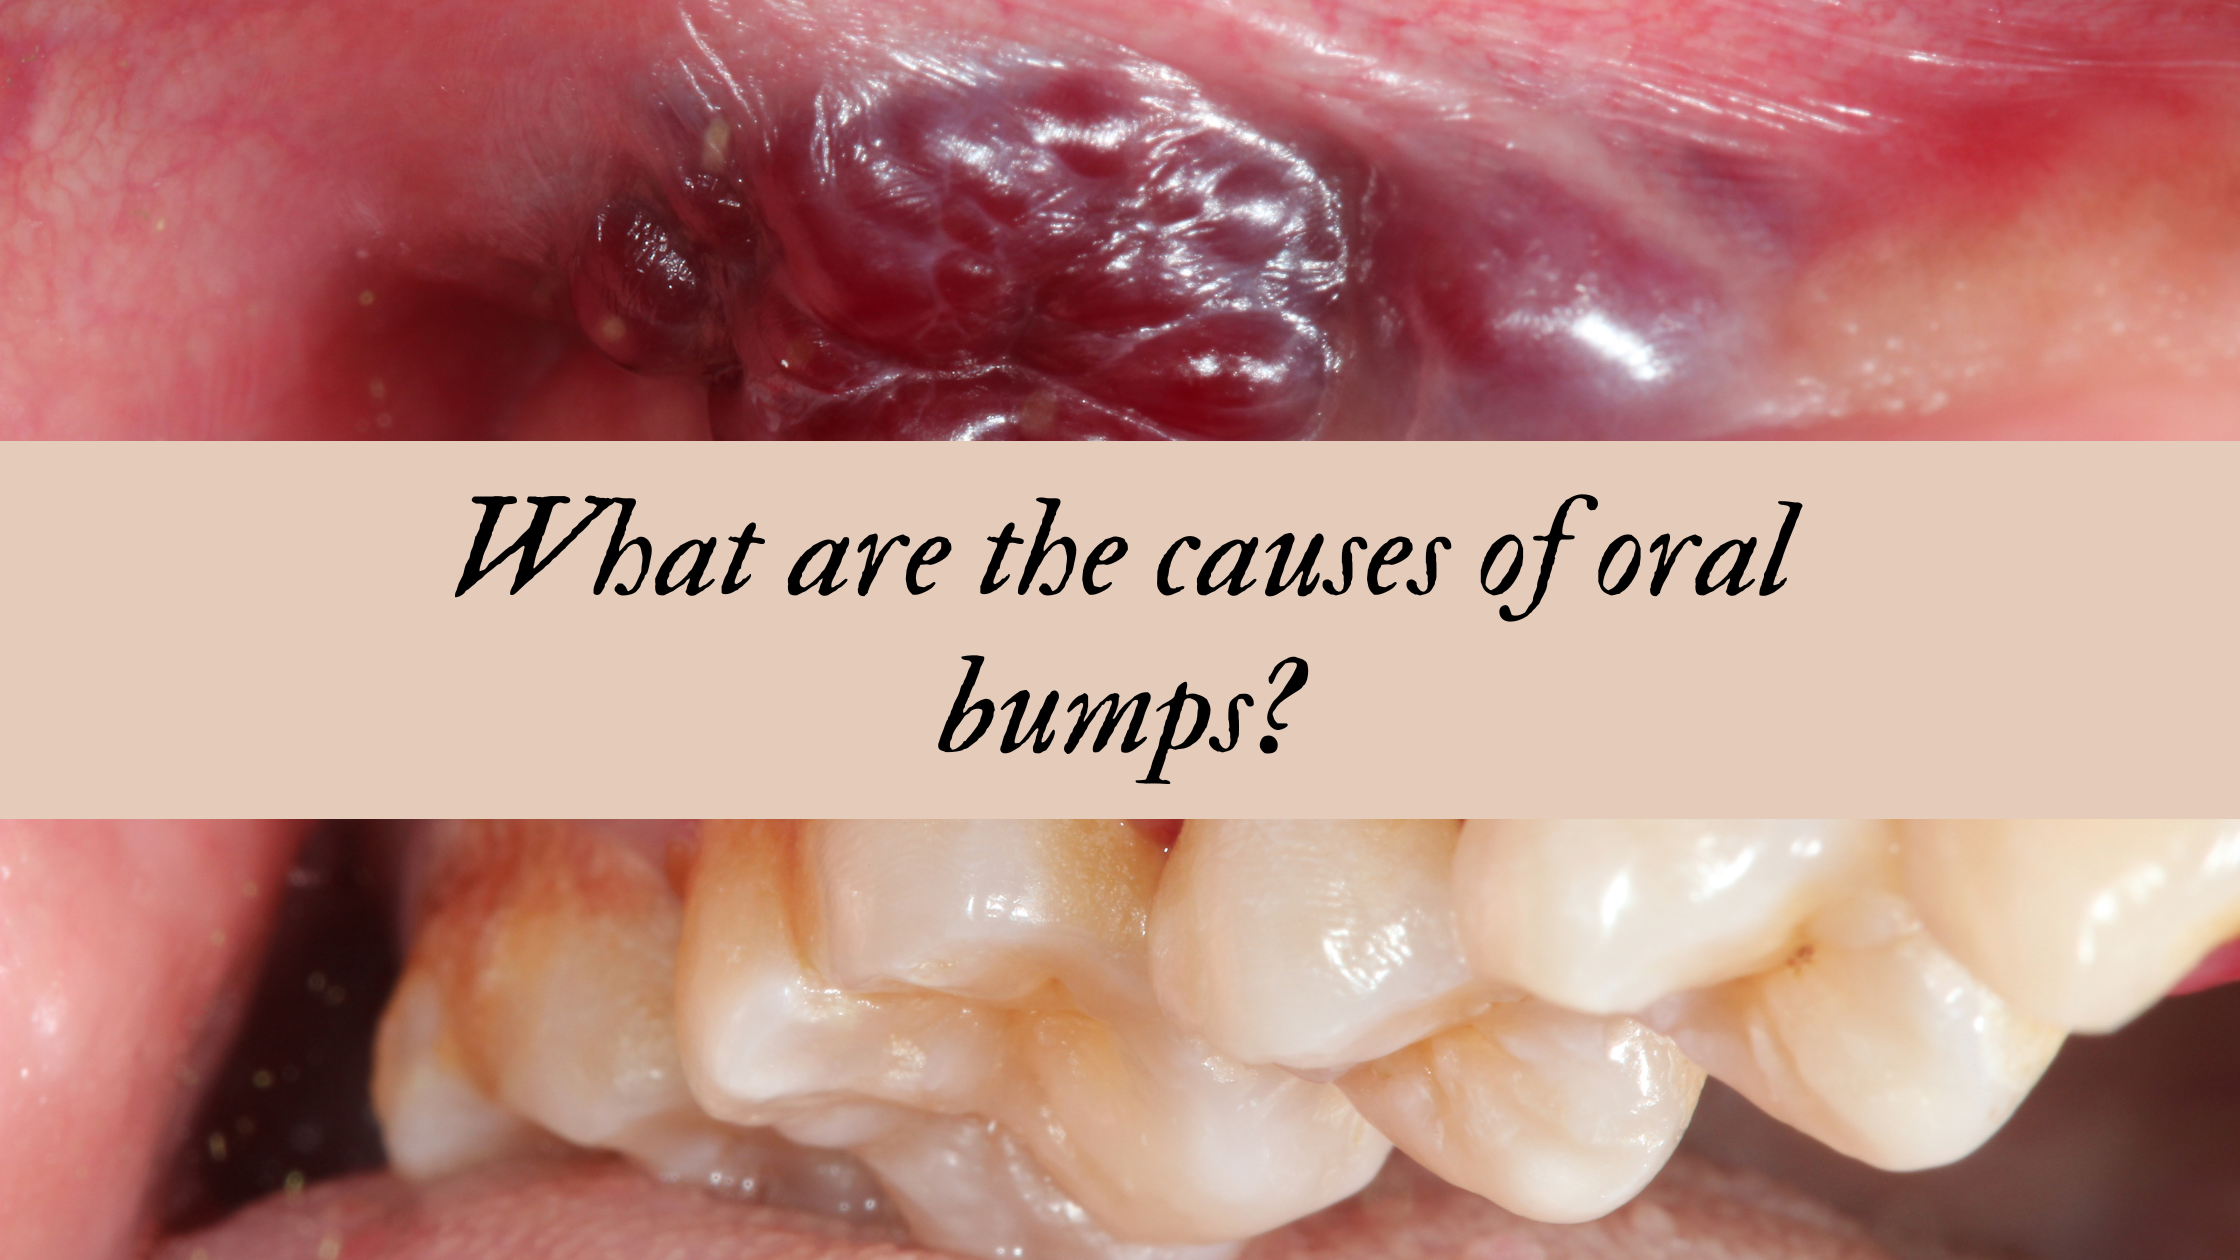 What are the causes of oral bumps